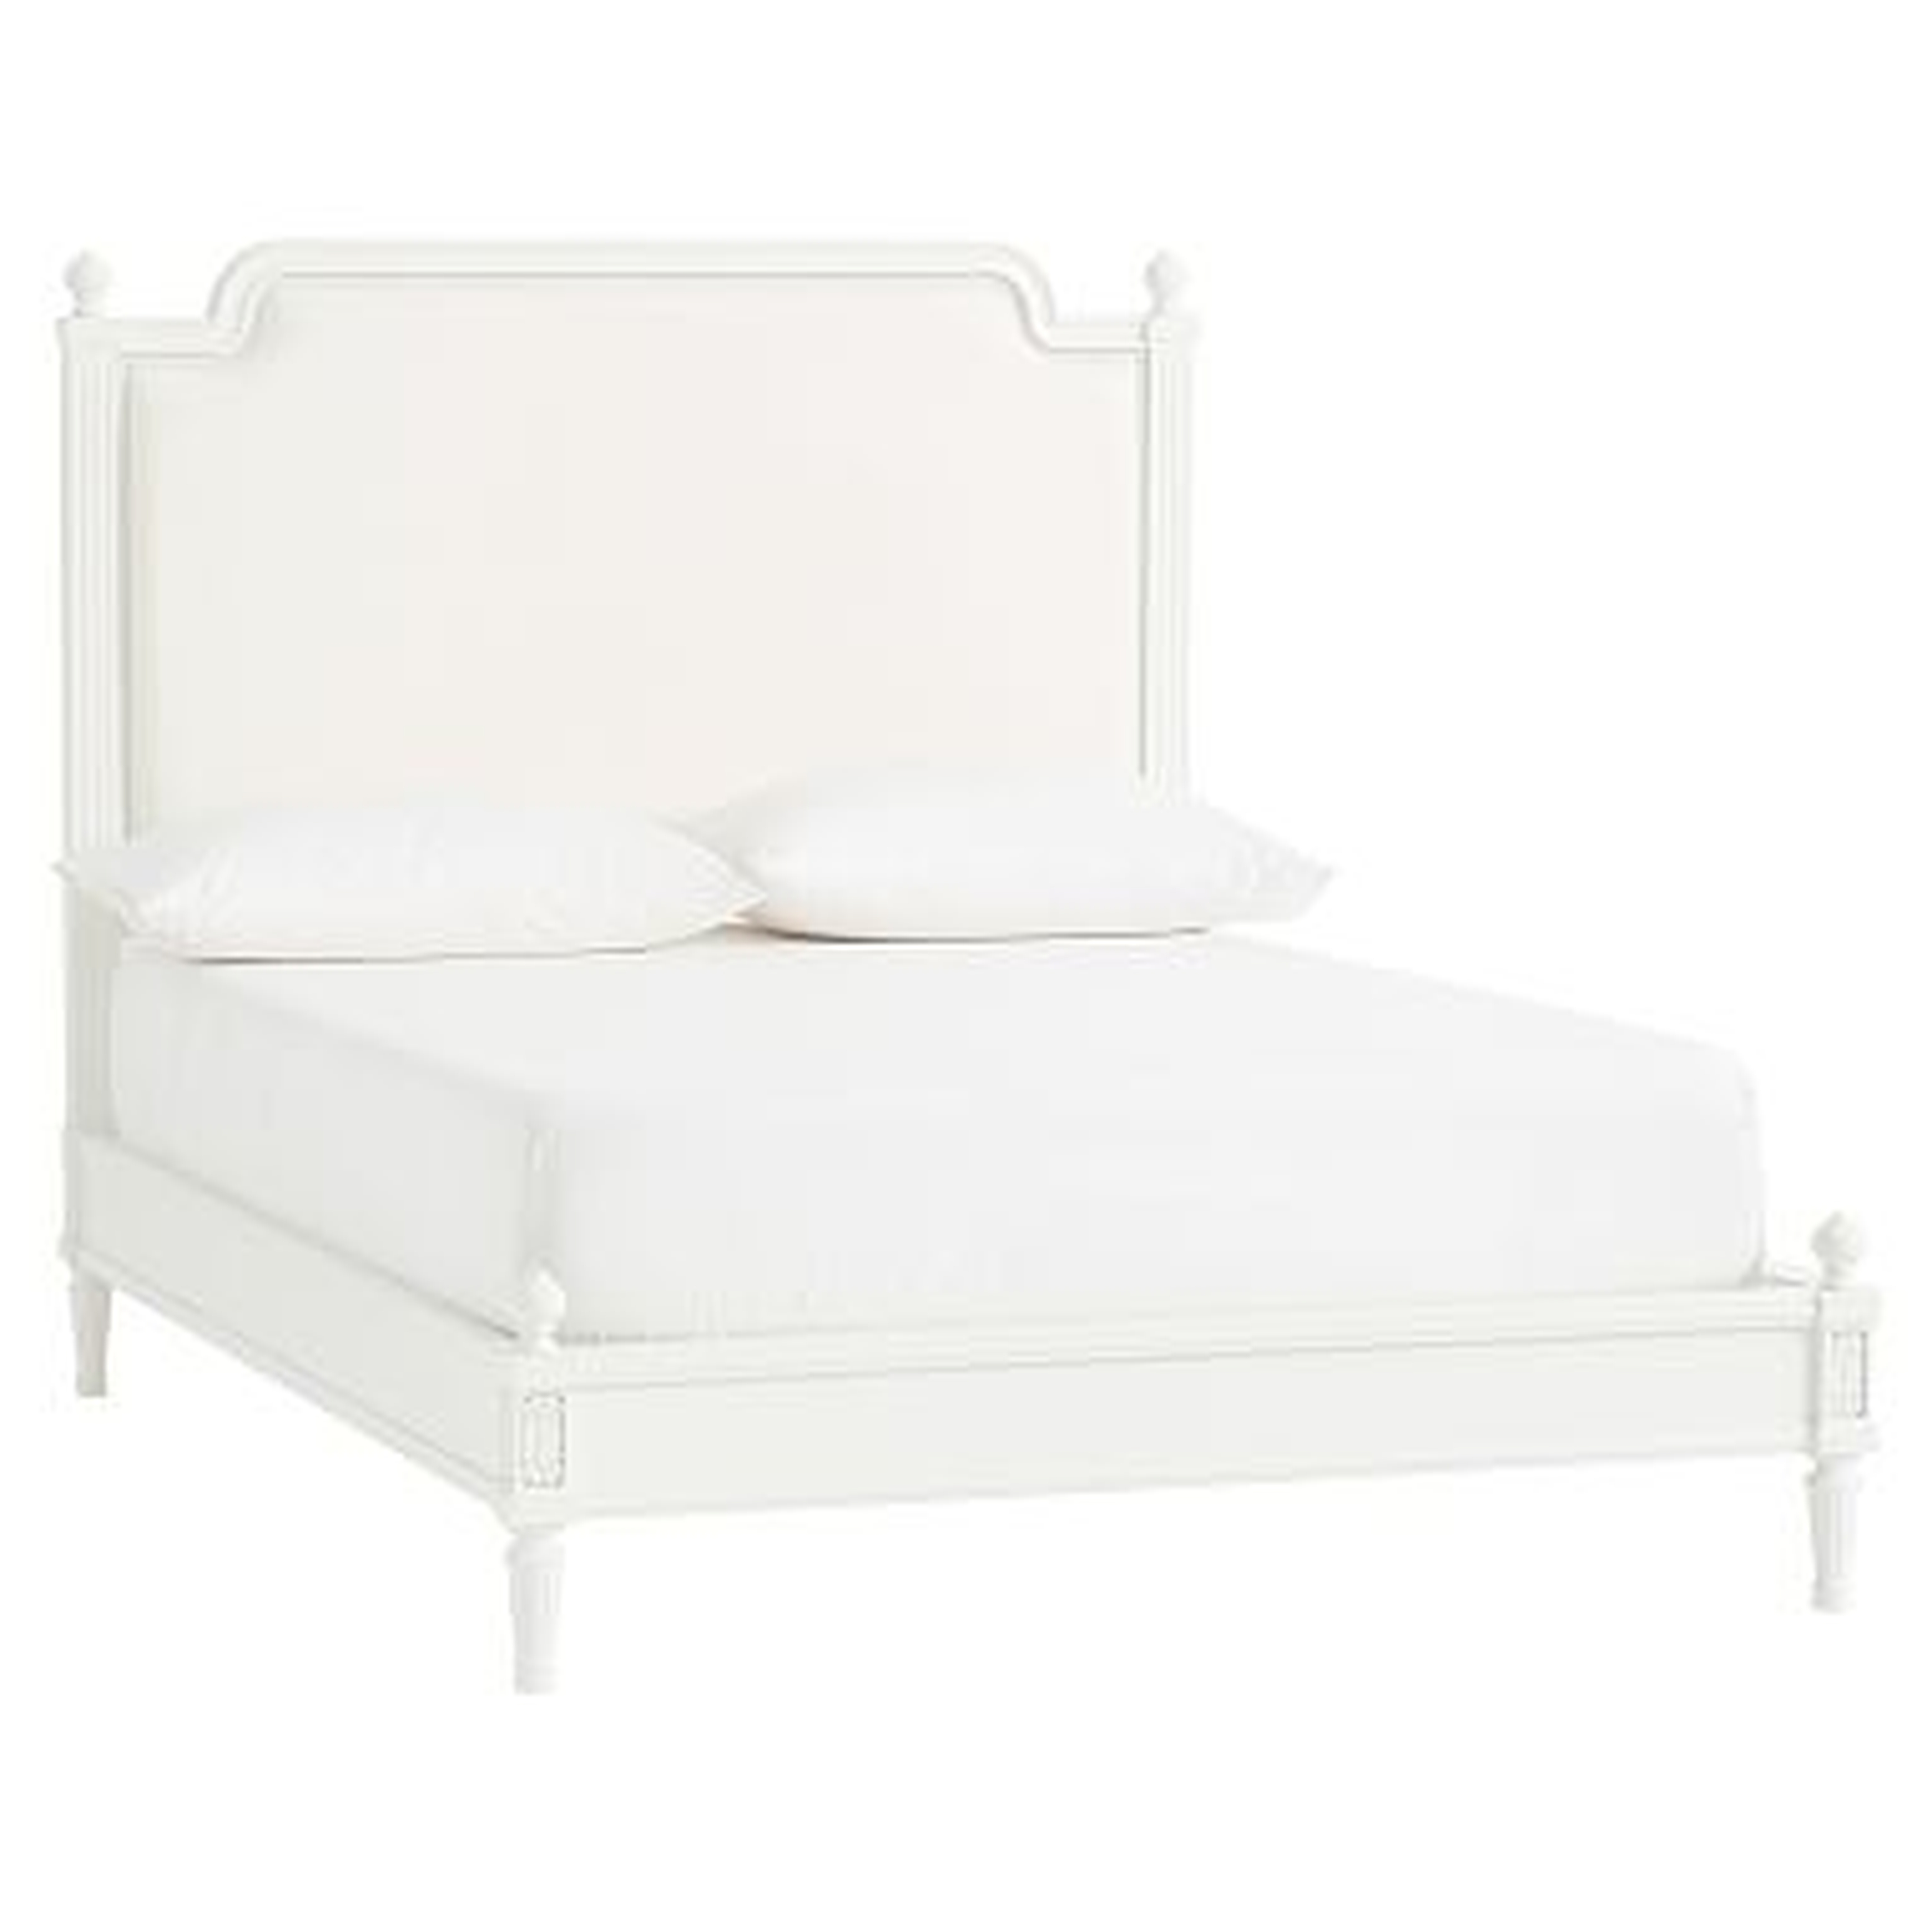 Colette Classic Bed, Queen, Simply White - Pottery Barn Teen